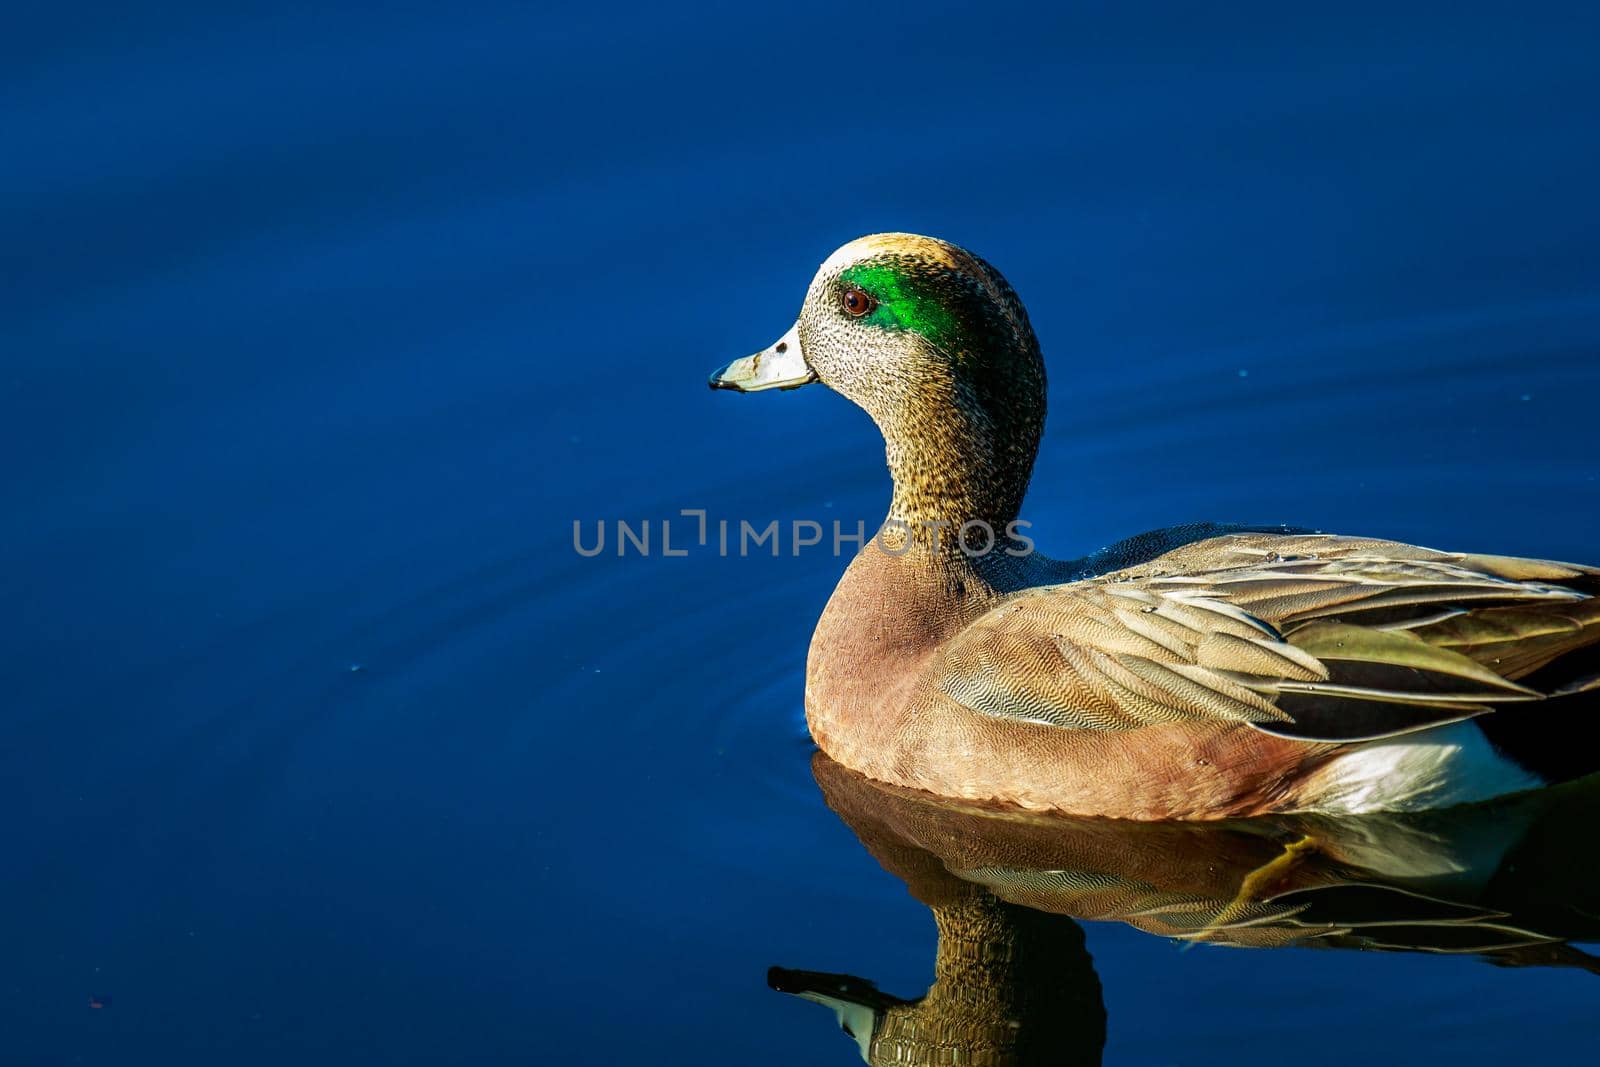 Male American wigeon swimming leisurely, with reflection showing in the water.